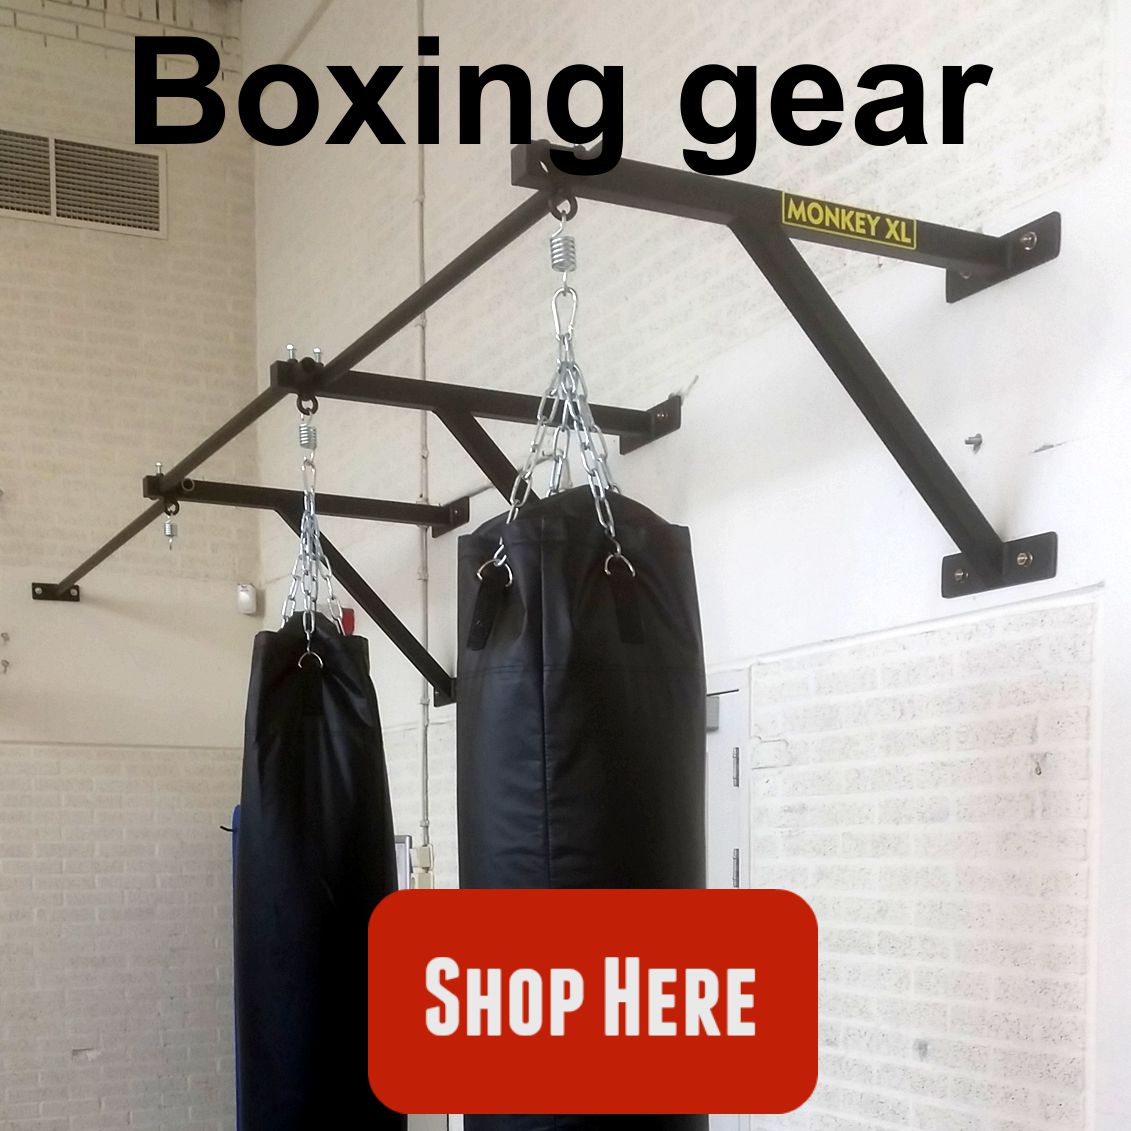 boks zak, boxing, crossfit, fitness, ophangbeugel, beugel, ophang systeem